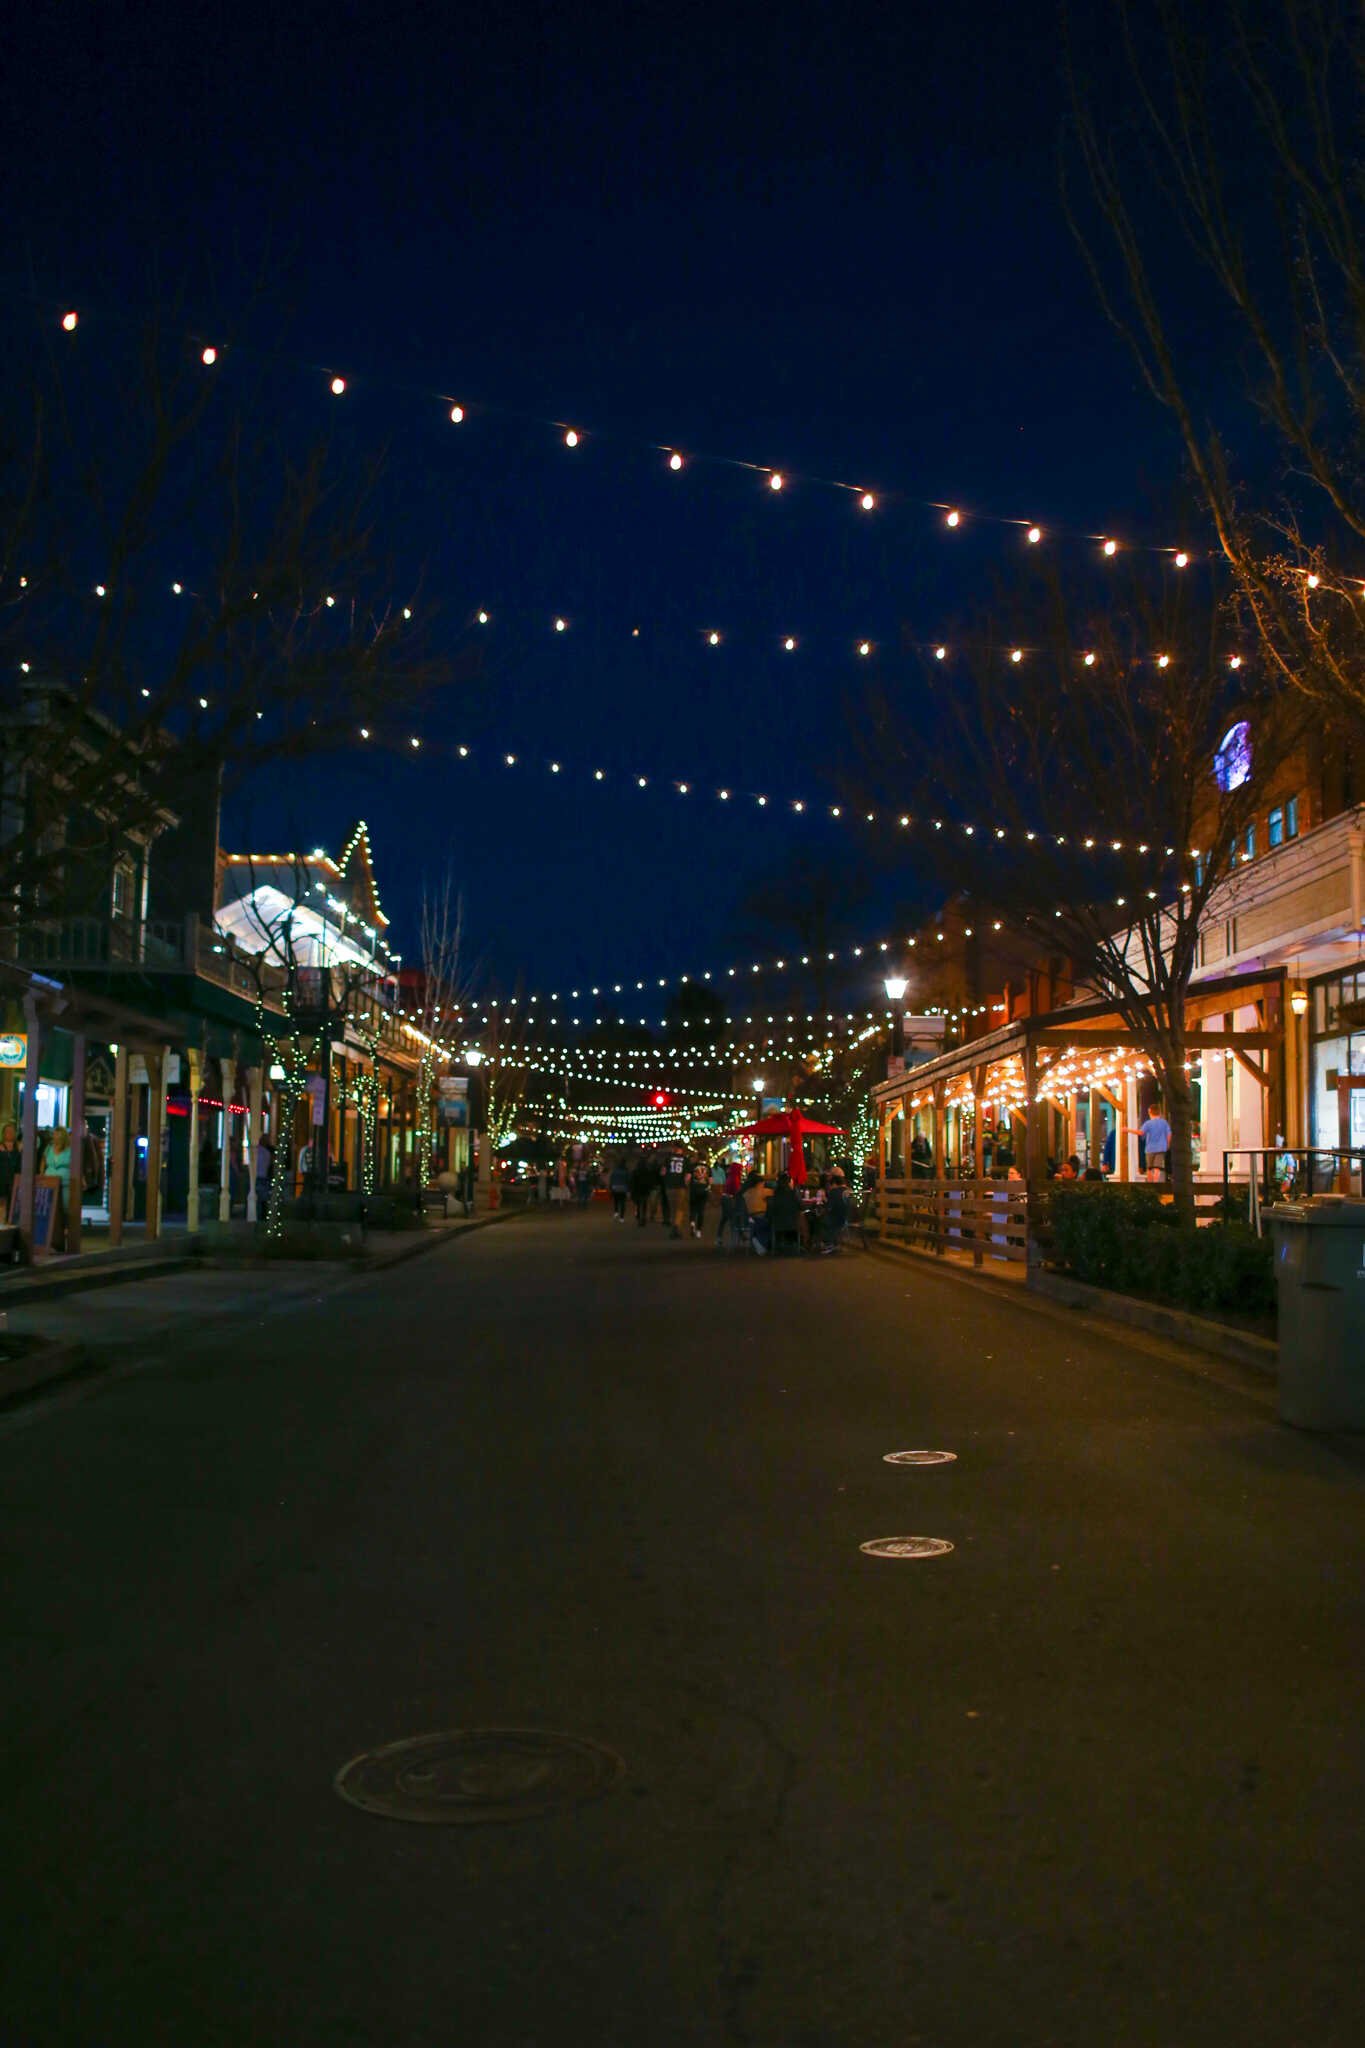 Family Travel Guide to Folsom California - Twinkle lights at night on Sutter St in the Folsom Historic District.